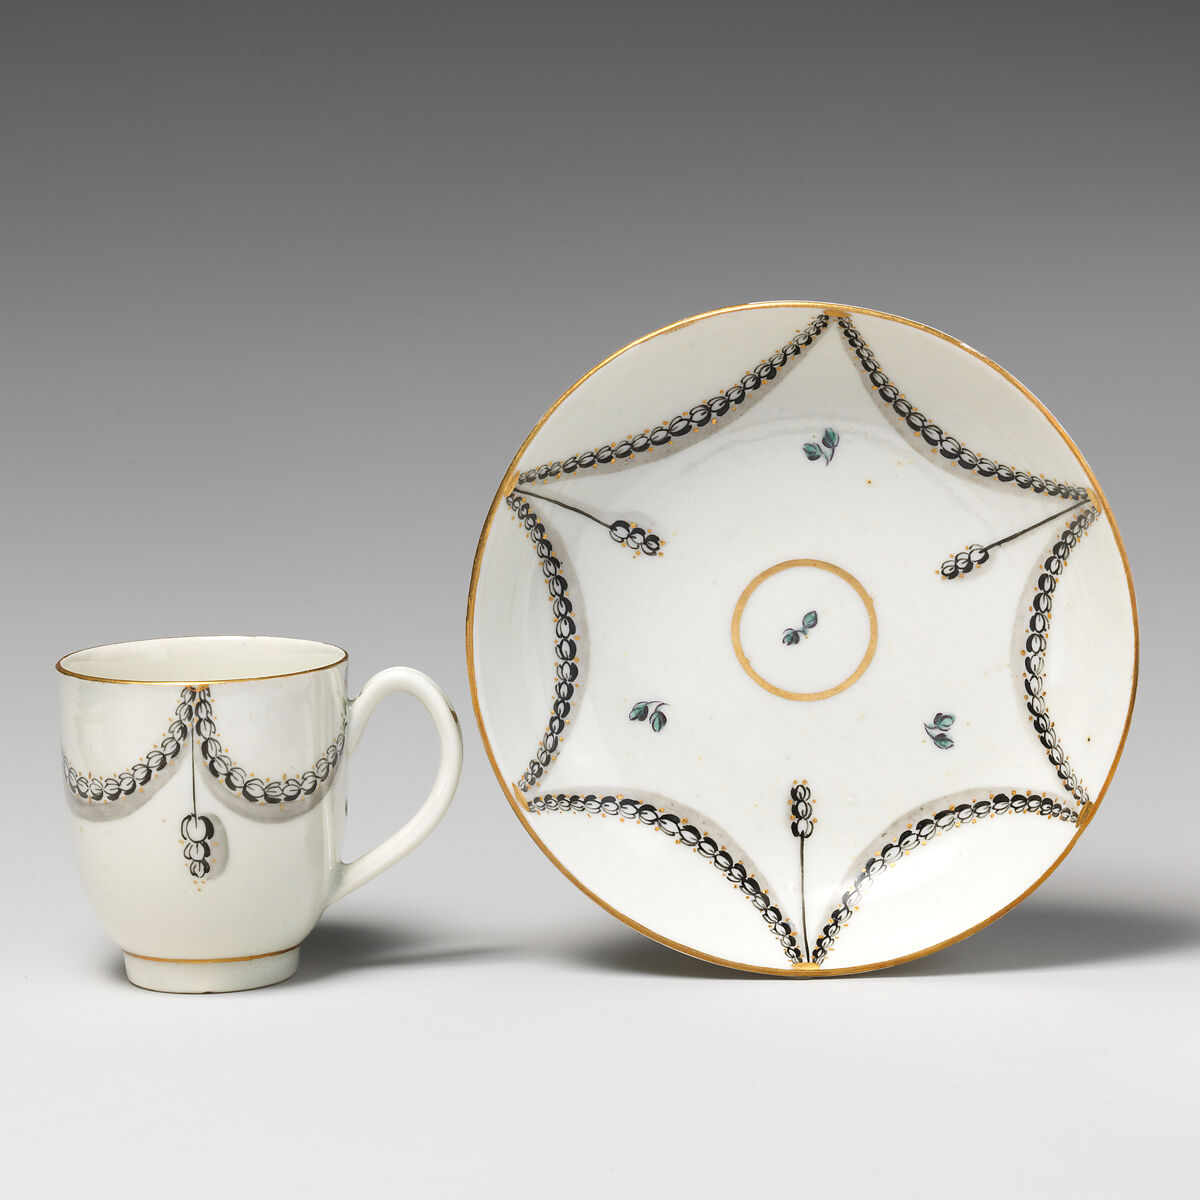 Coffee cups (6) (part of a service), Caughley Factory (British, ca. 1772–1799), Soft-paste porcelain, British, Caughley 